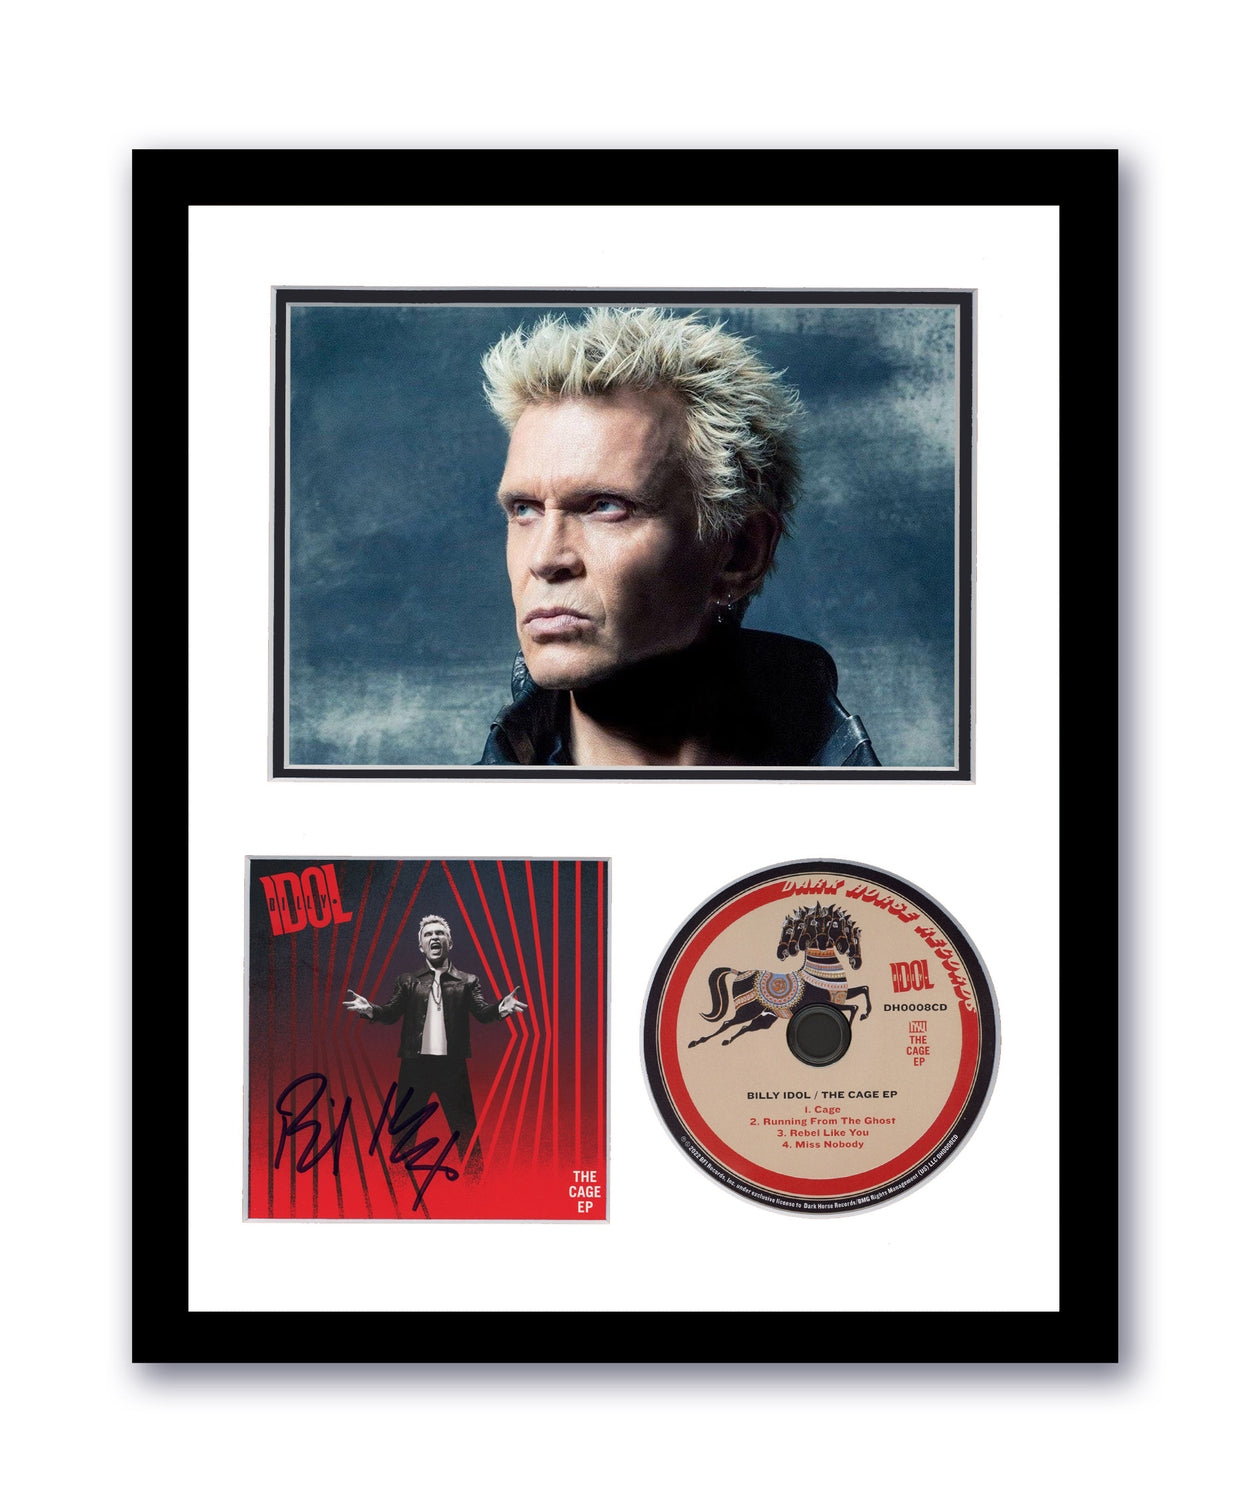 Billy Idol Autographed Signed 11x14 Framed CD The Cage EP ACOA 8